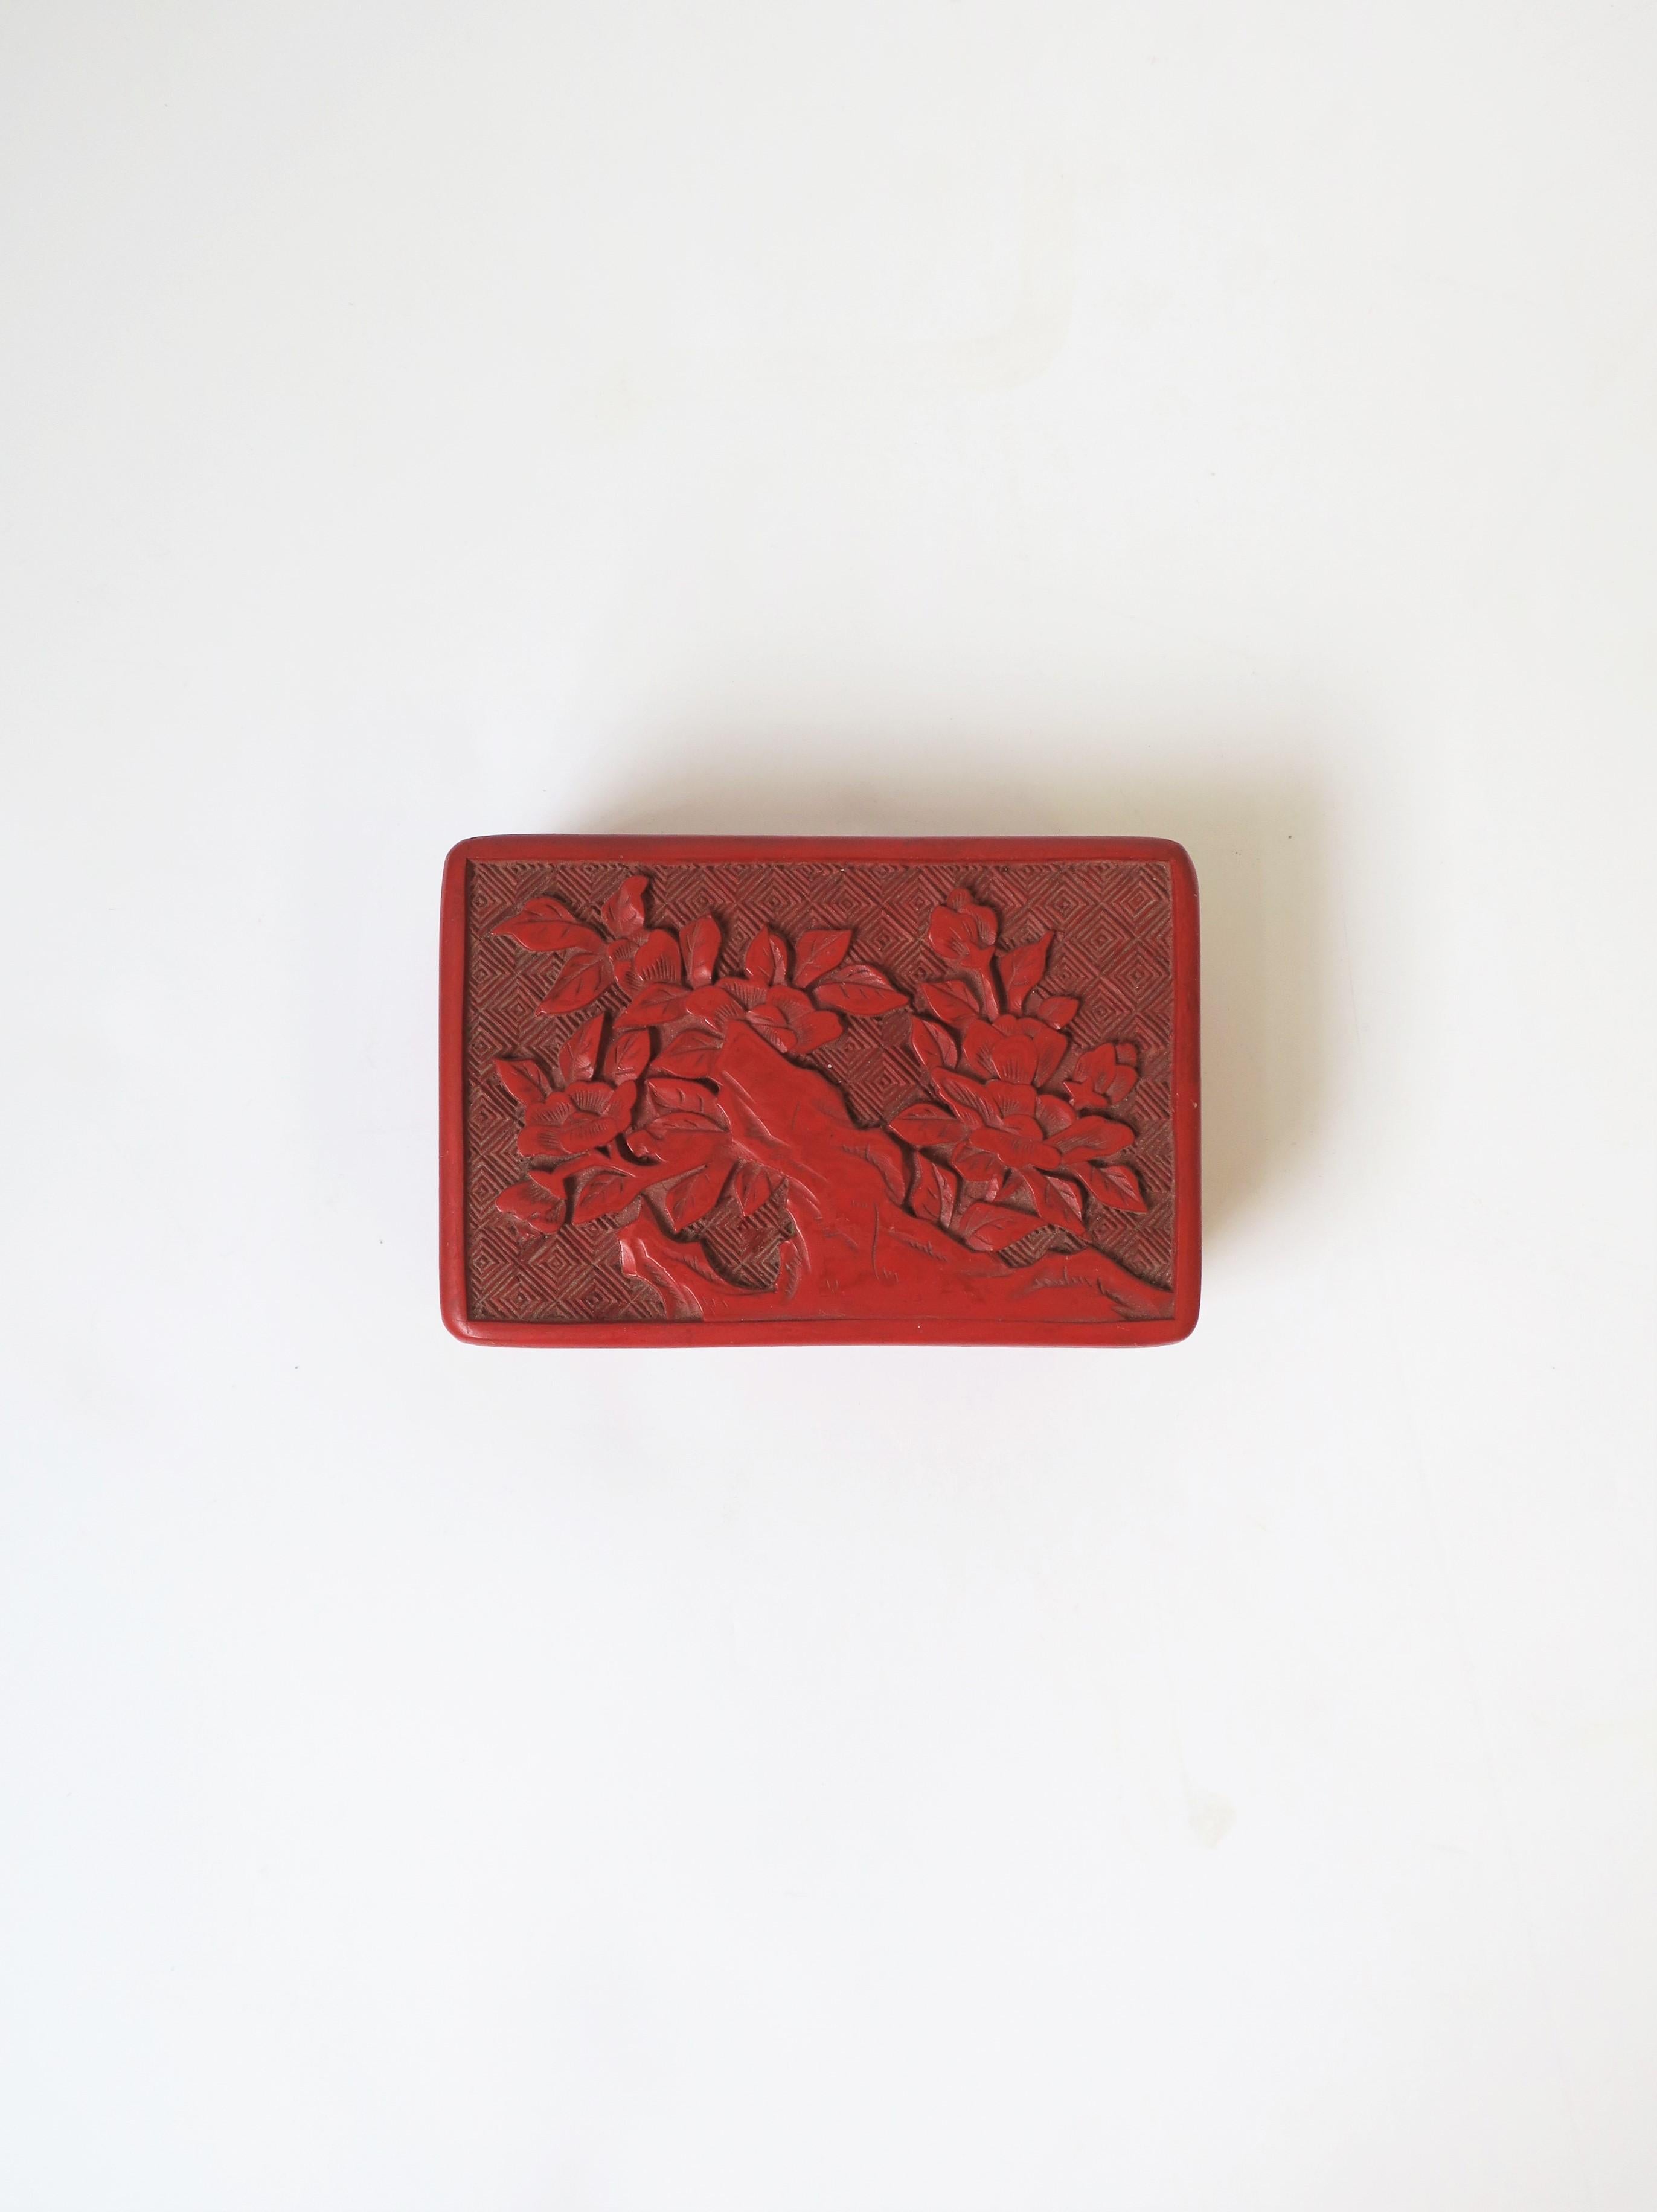 Lacquered Chinese Red Cinnabar and Black Lacquer Box